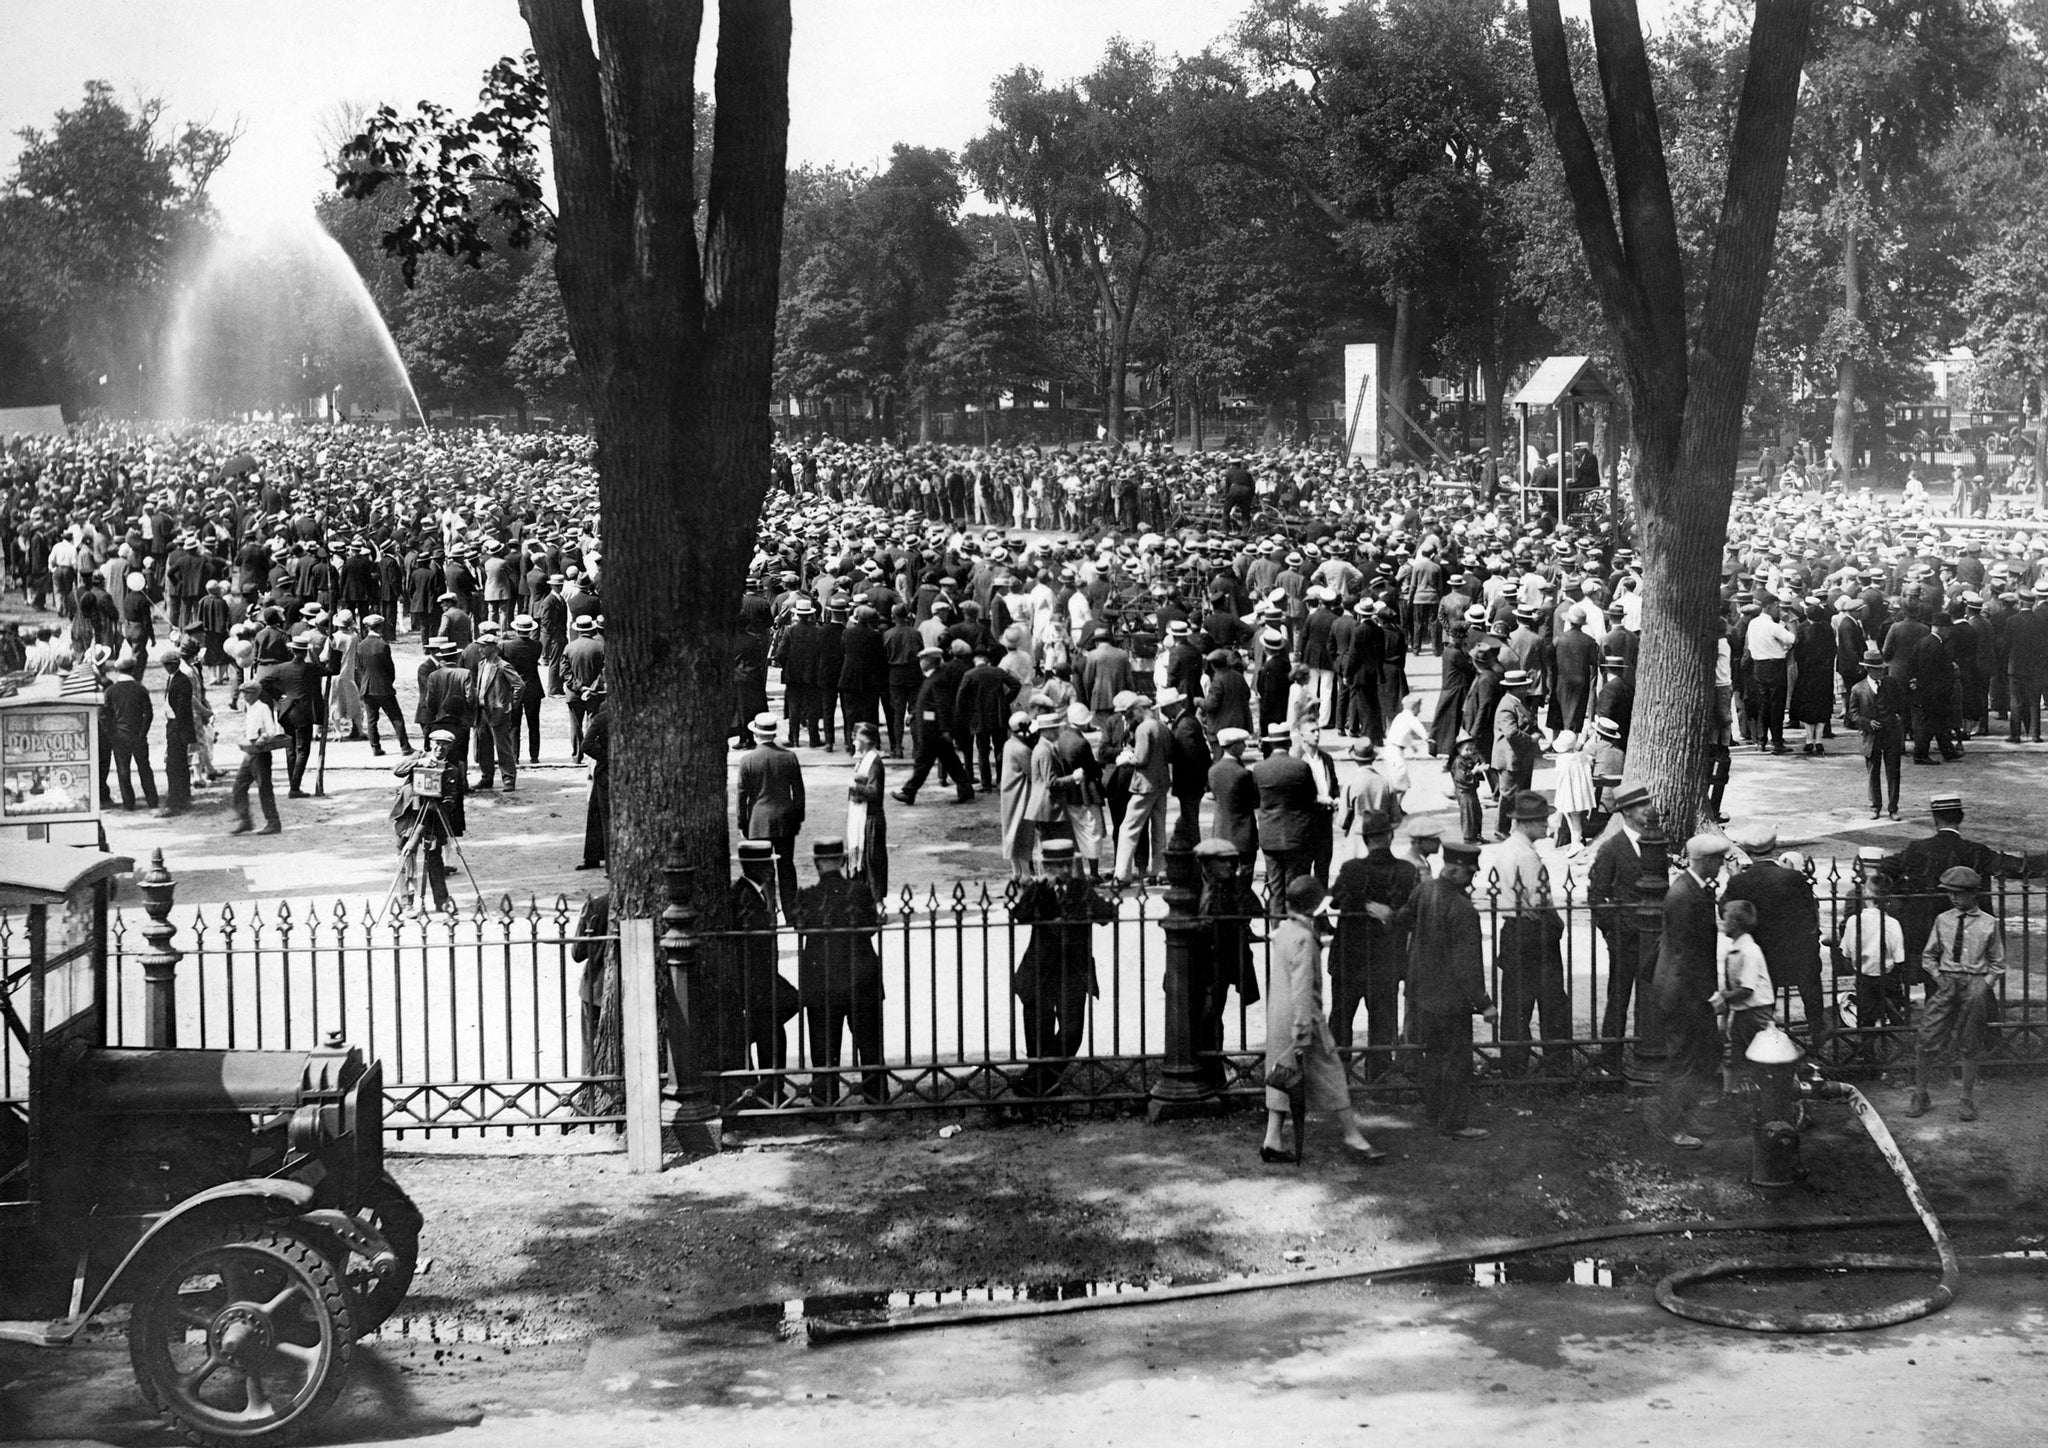 Hundreds gather to watch firemen compete in the muster at the Salem Tercentenary in 1926. -- Courtesy Phillips Library, Peabody Essex Museum